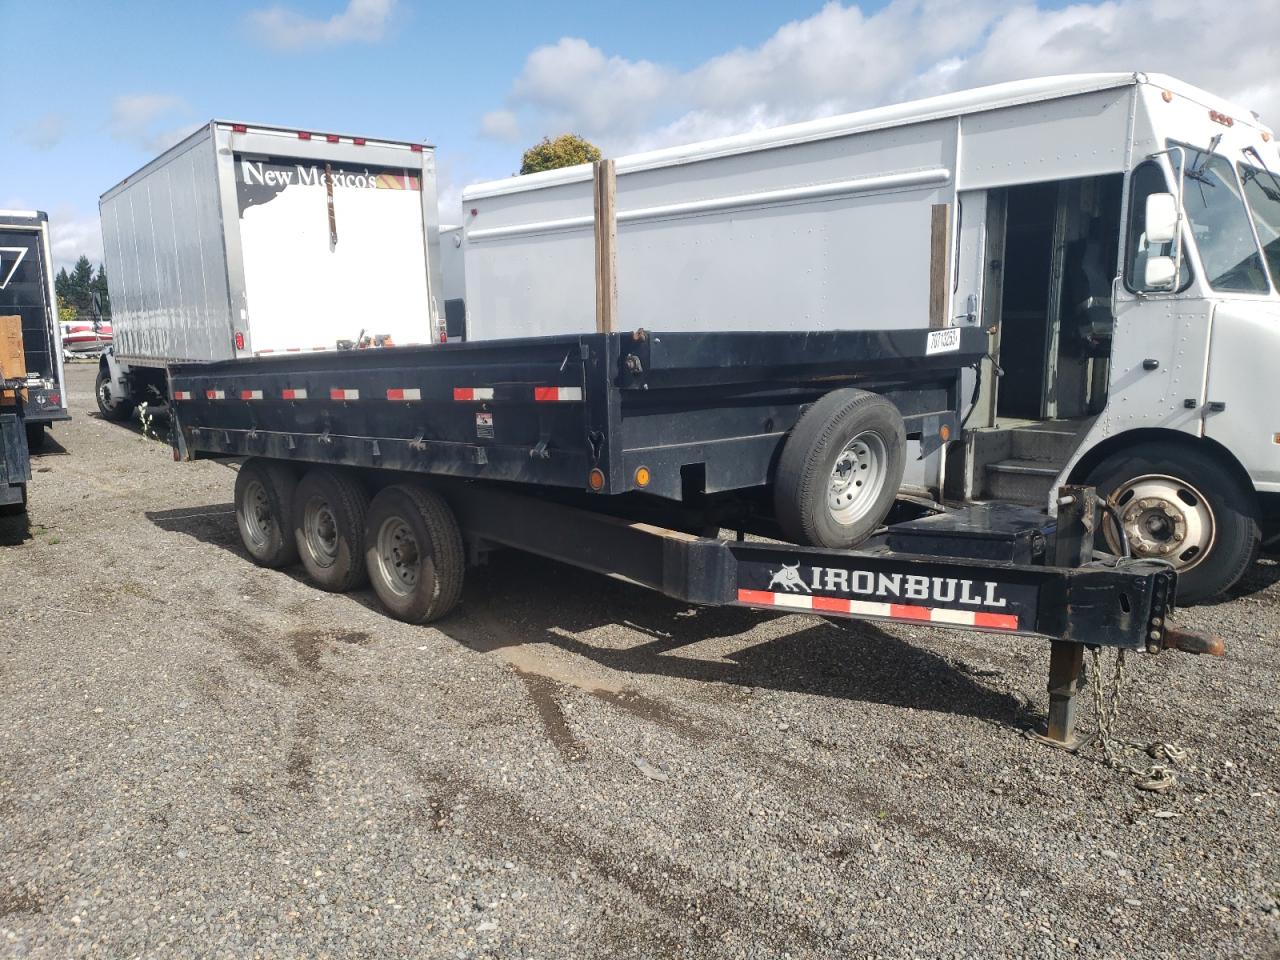 2020 NORSTAR TRAILERS Norstar Trailers